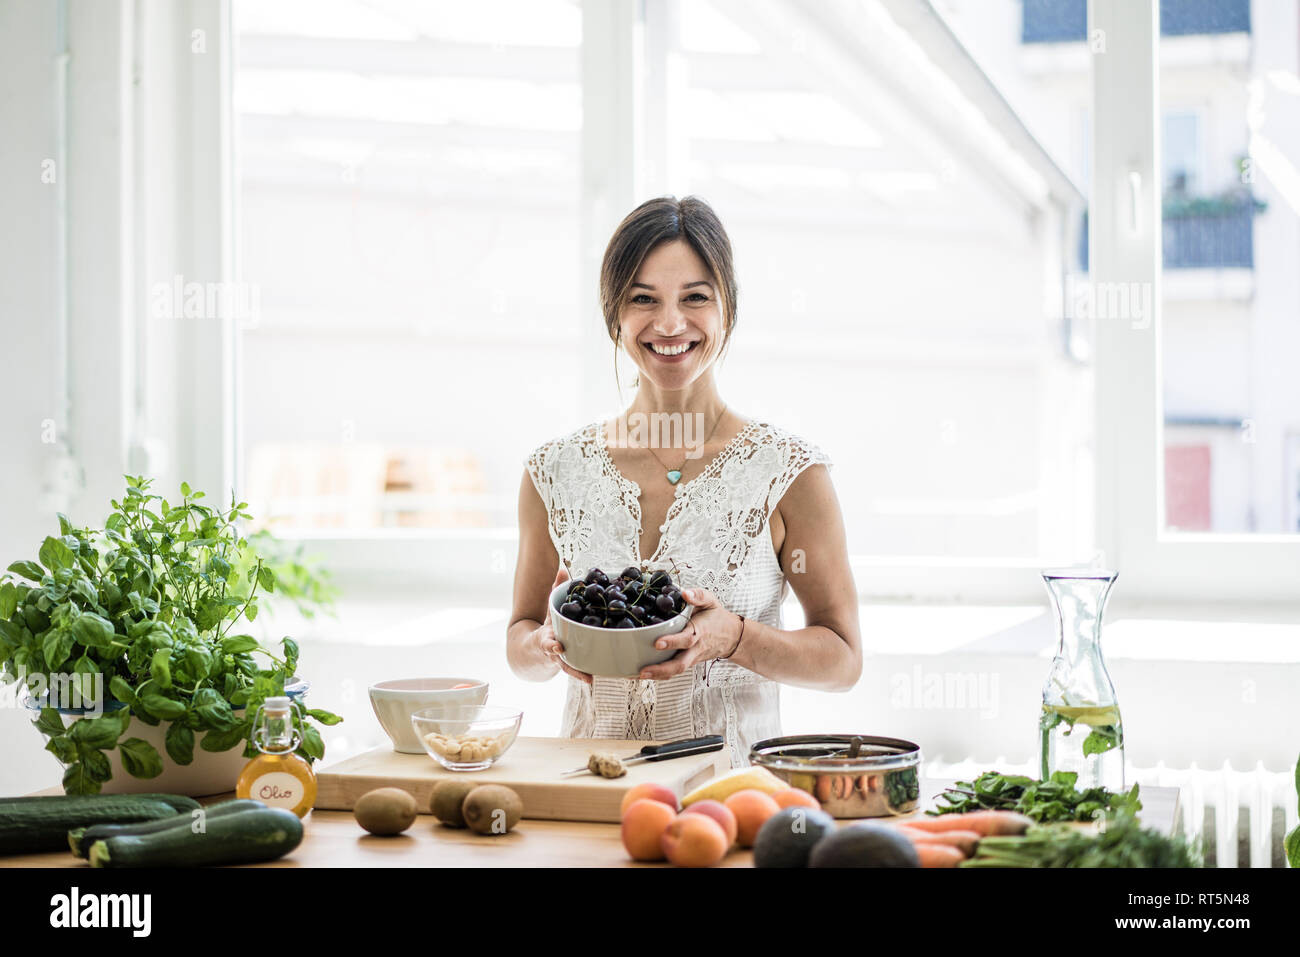 Woman preparing healthy food in her kitchen, holding bowl of cherries Stock Photo